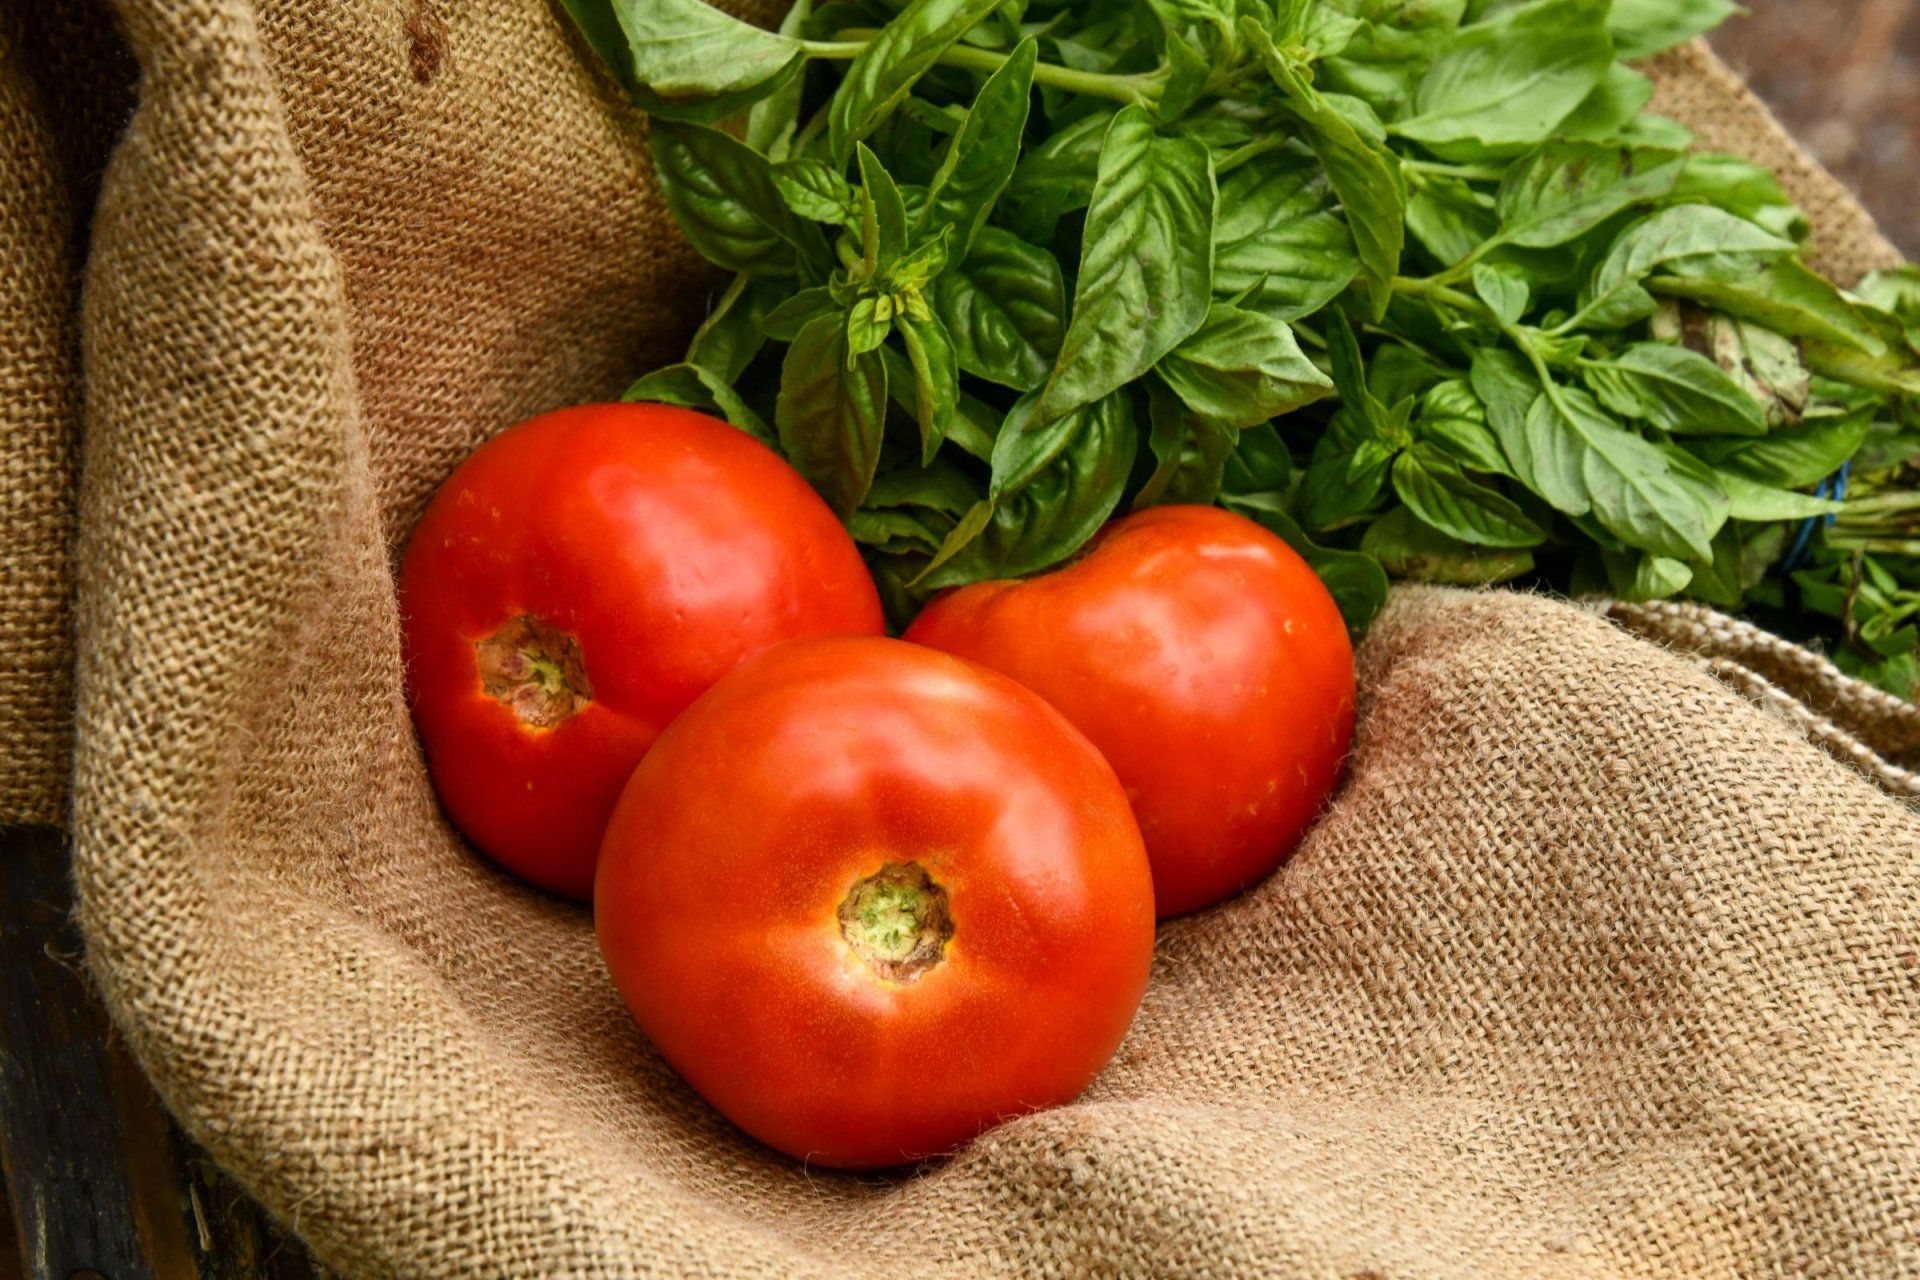 three tomatoes are sitting on a piece of burlap next to basil